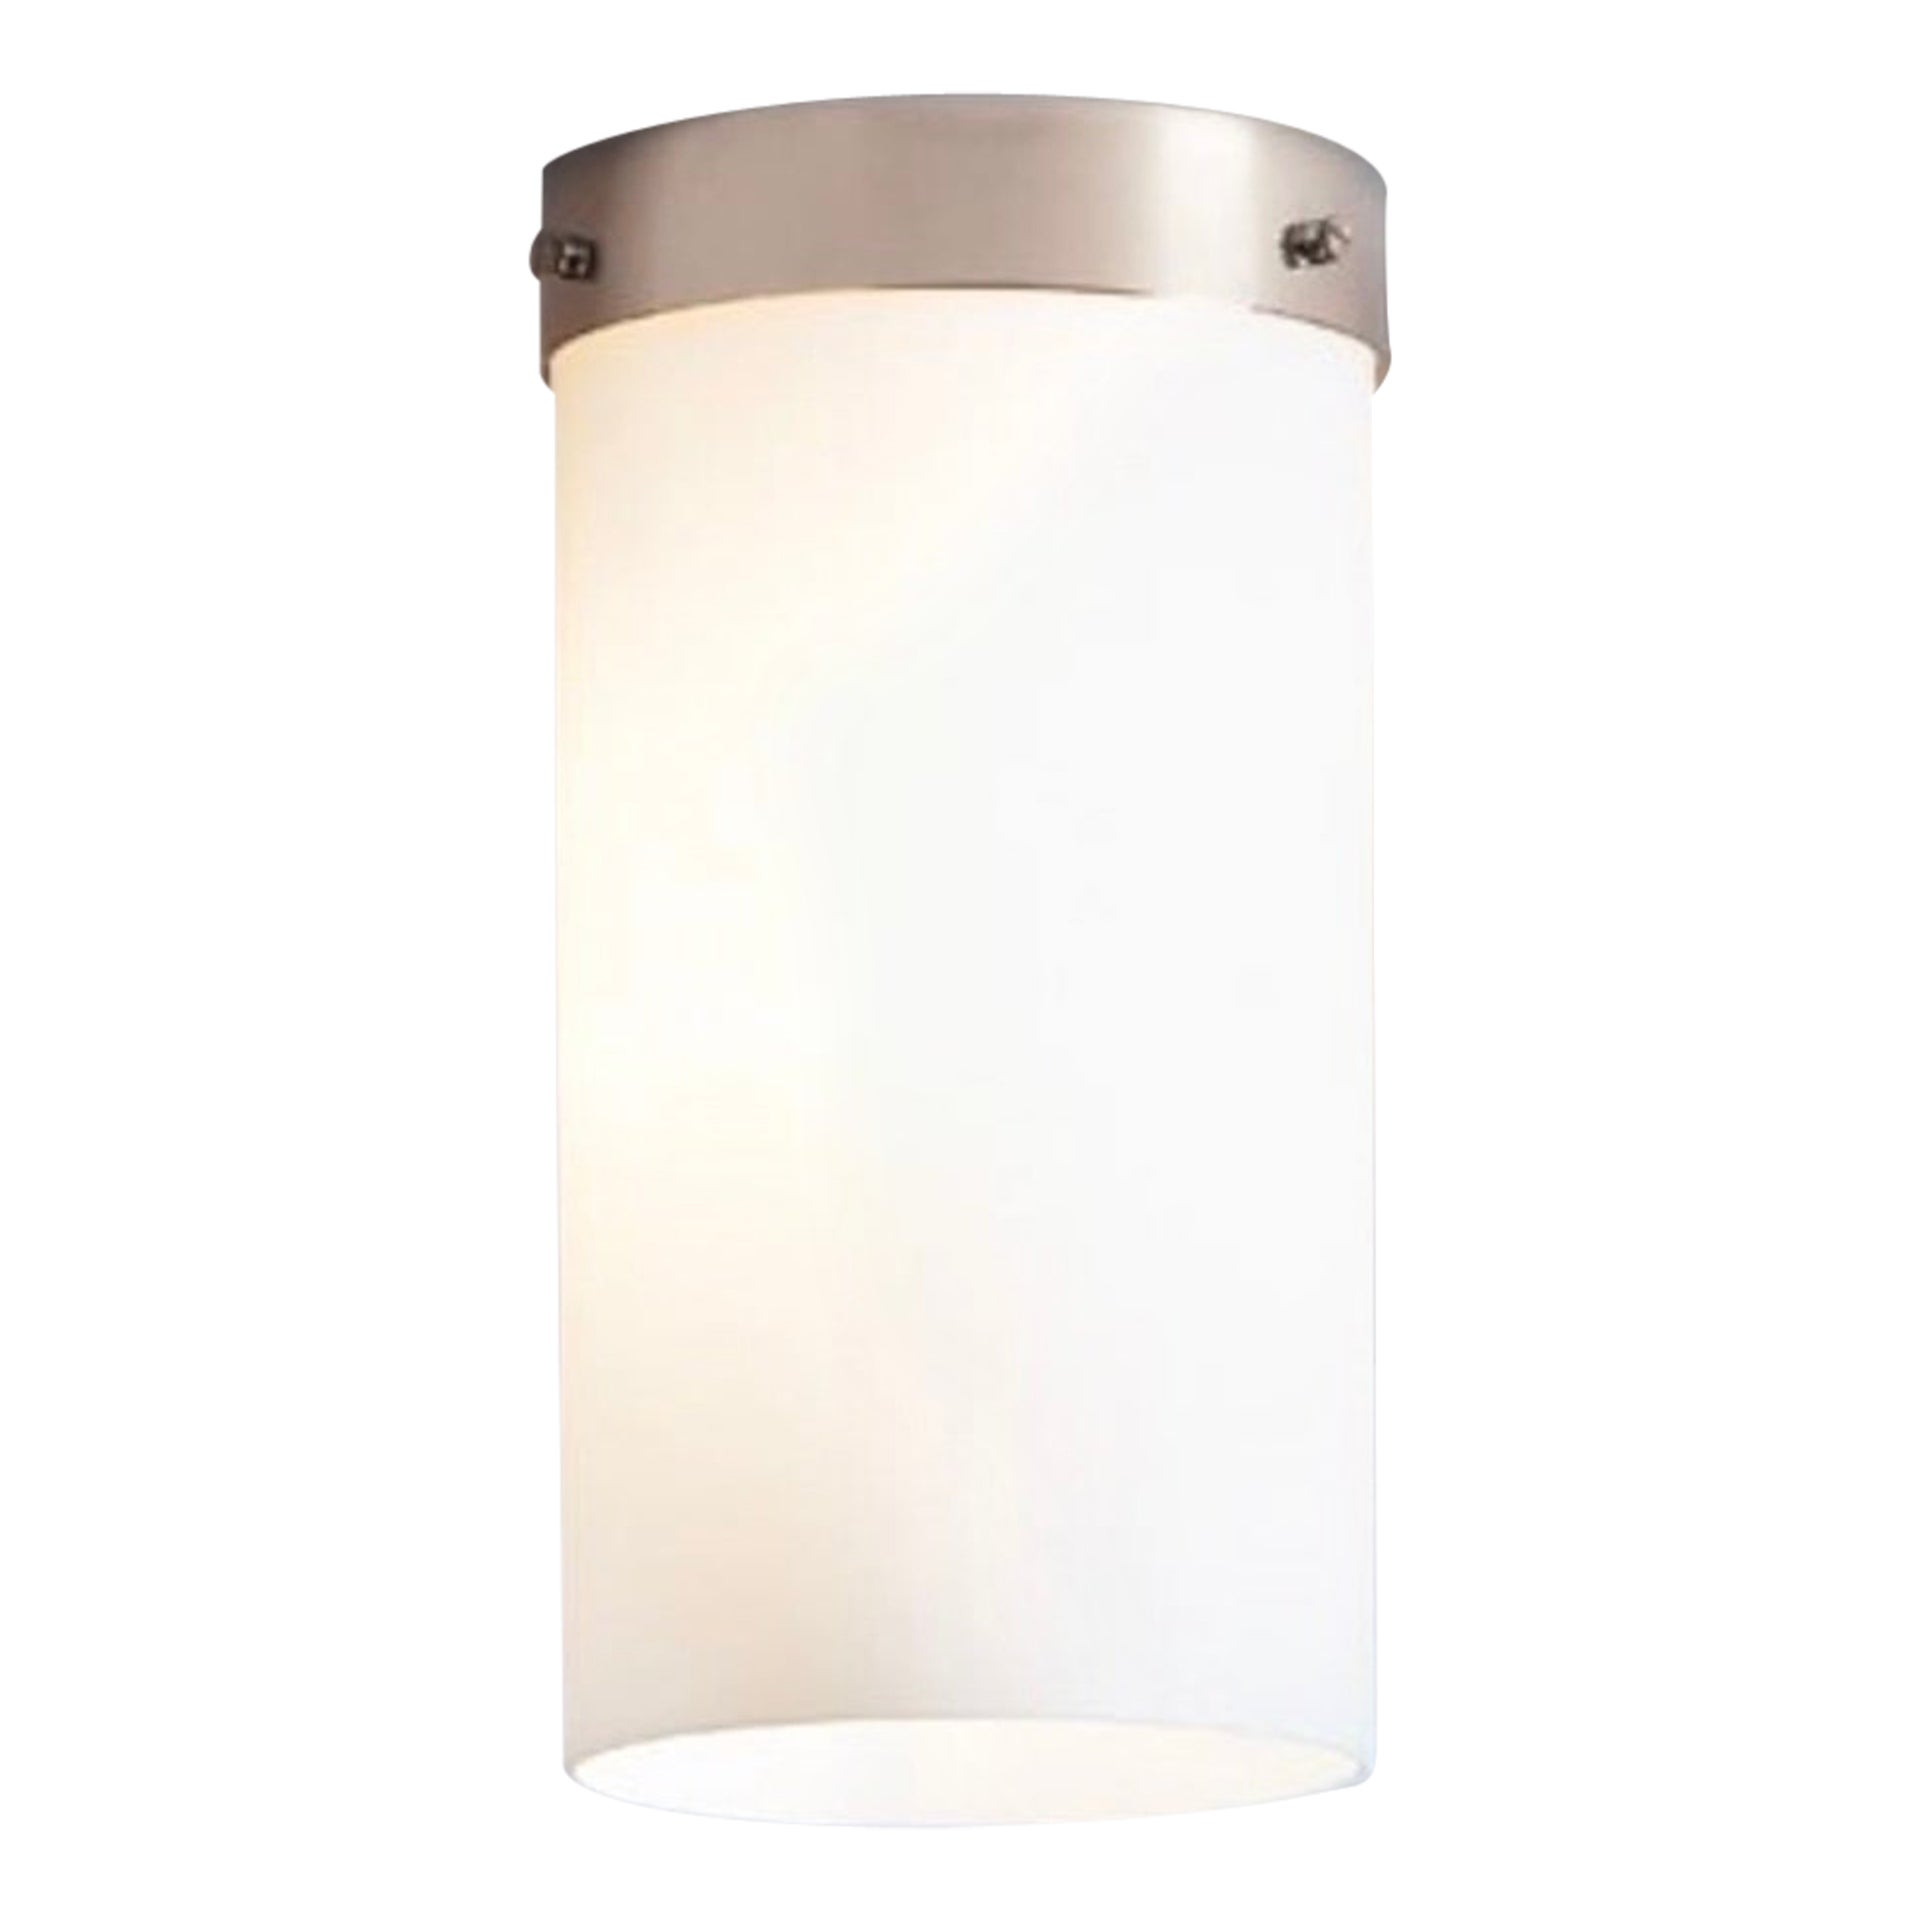 Bauhaus Ceiling Lamp DMB 31 by Marianne Brandt for Tecnolumen For Sale